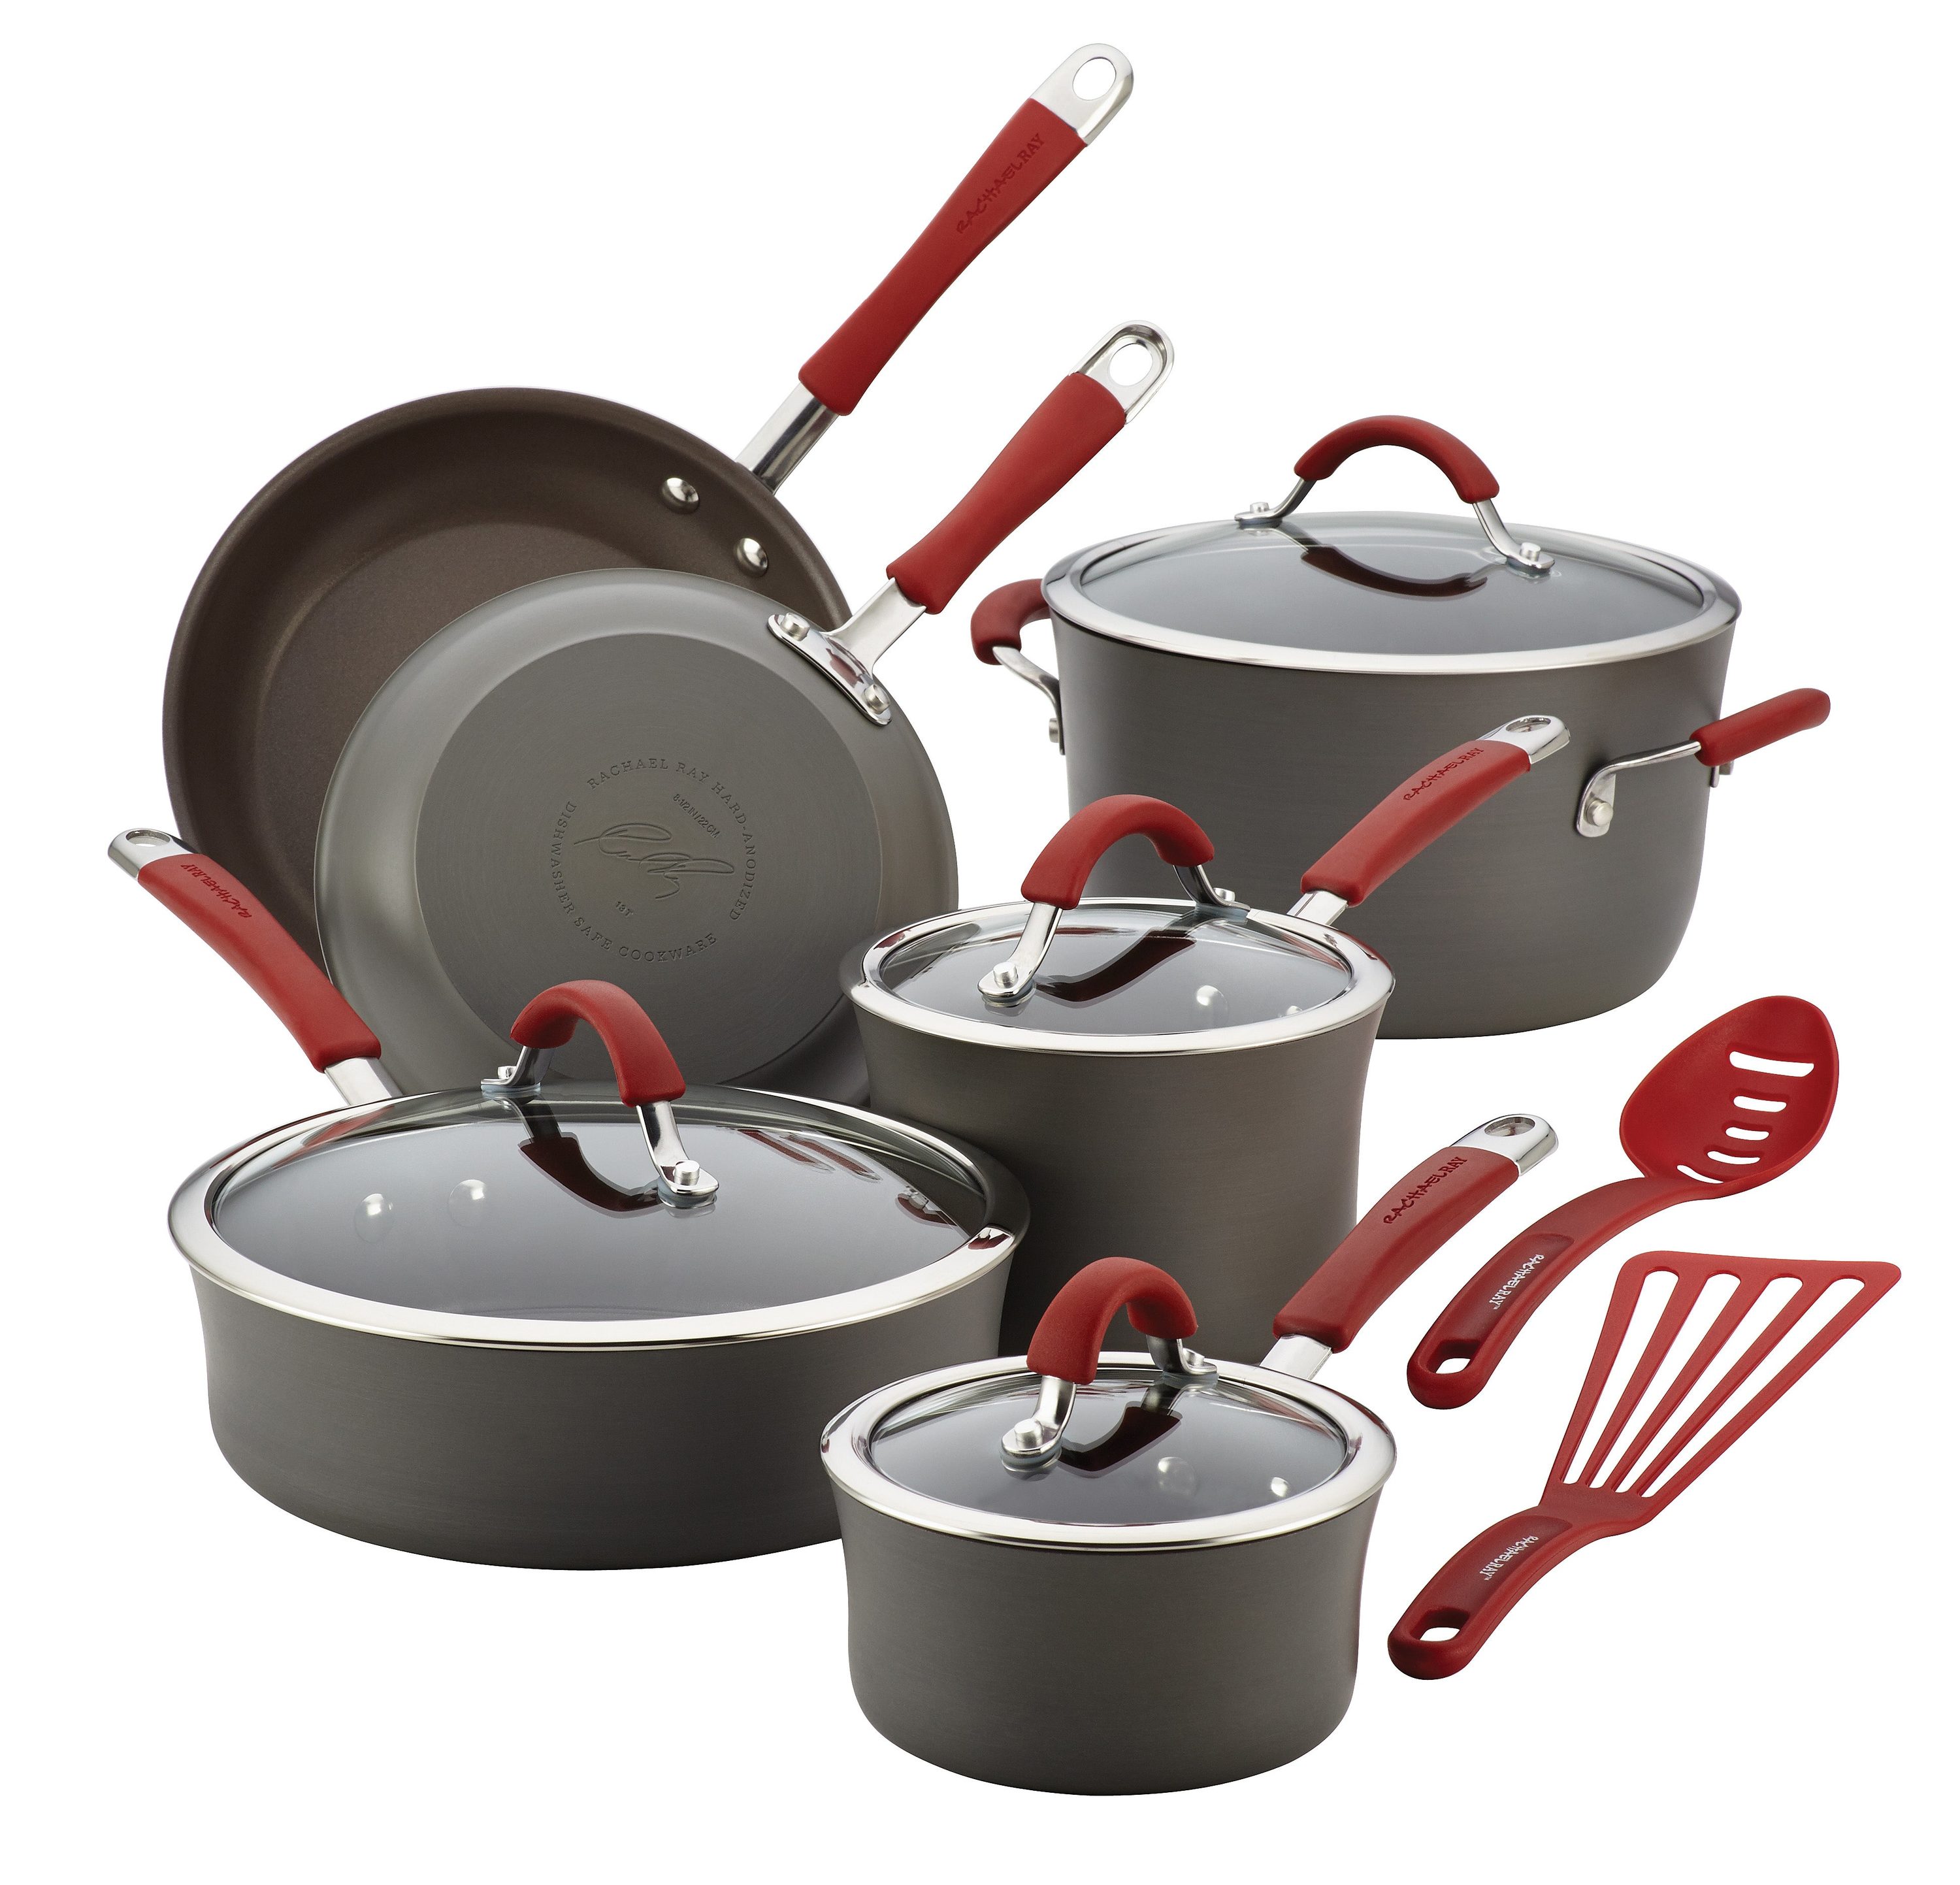 Rachael Ray 12pc Cucina Piece Hard-Anodized Cookware Set, Red